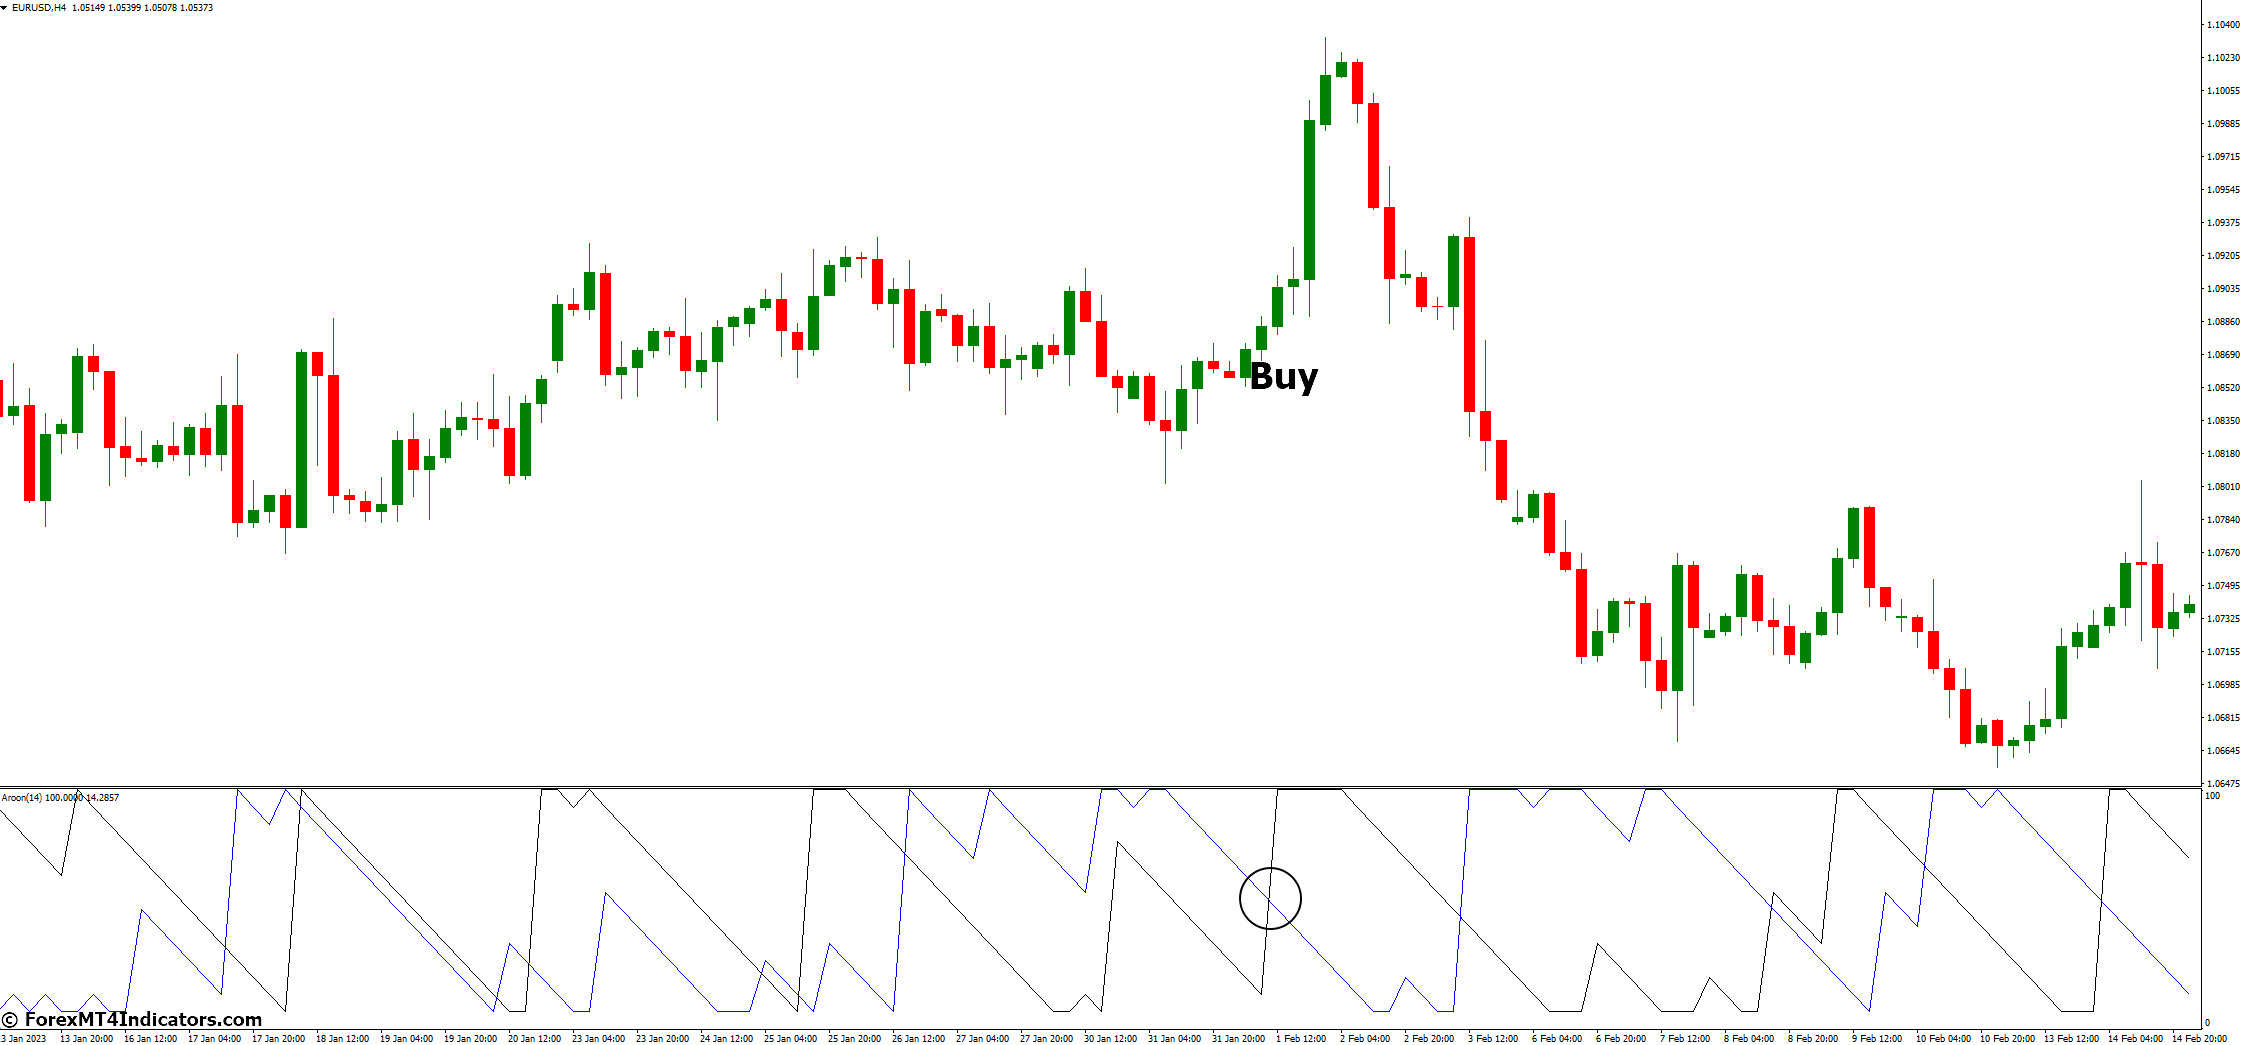 How to Trade with Aroon MT4 Indicator - Buy Entry